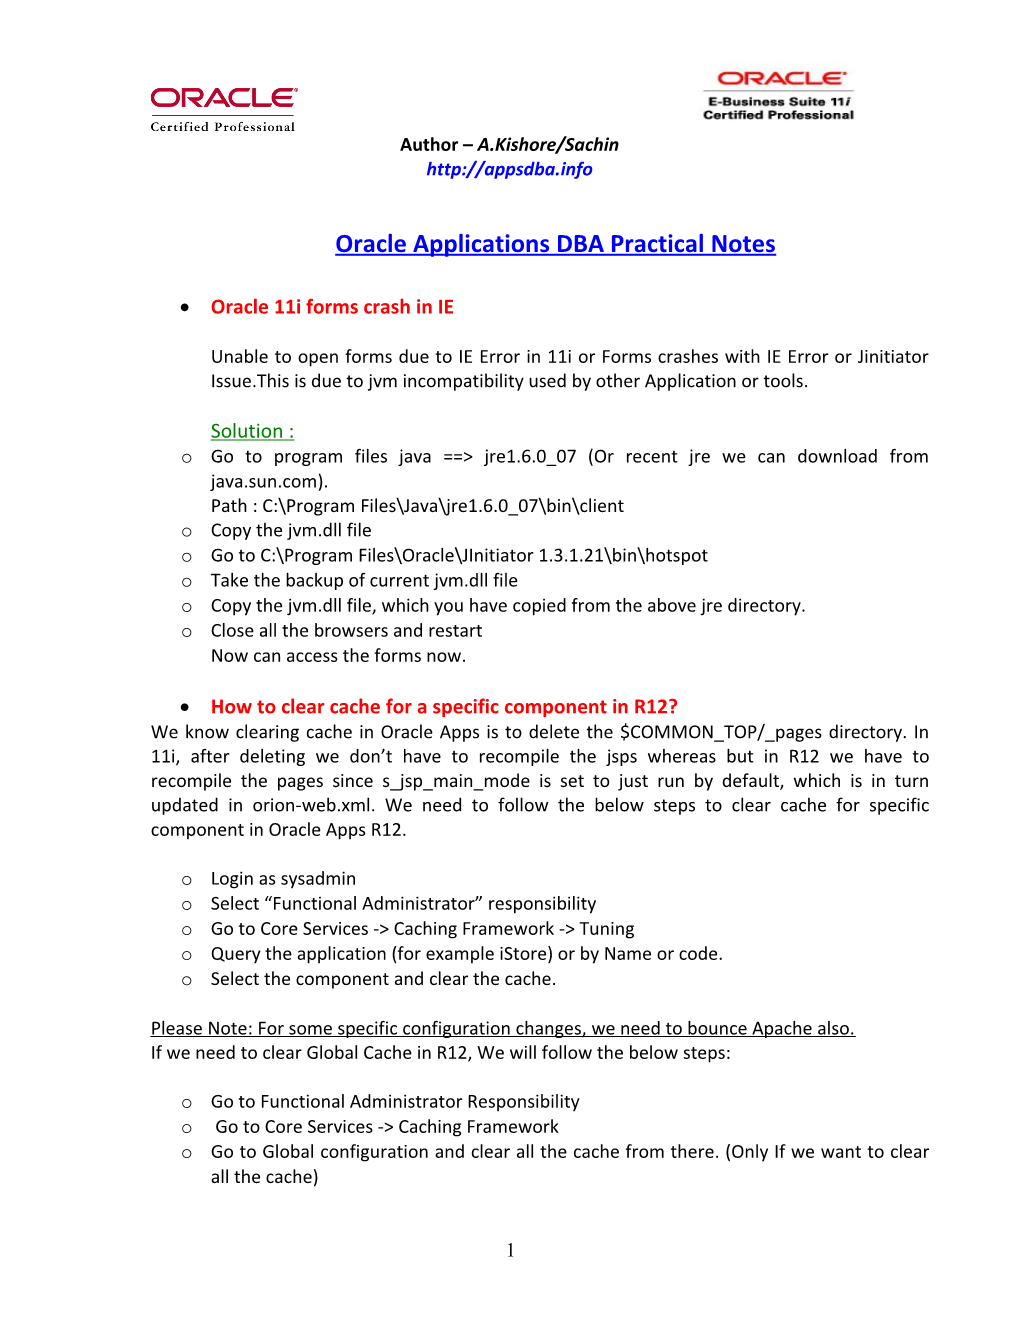 Oracle Applications DBA Practical Notes